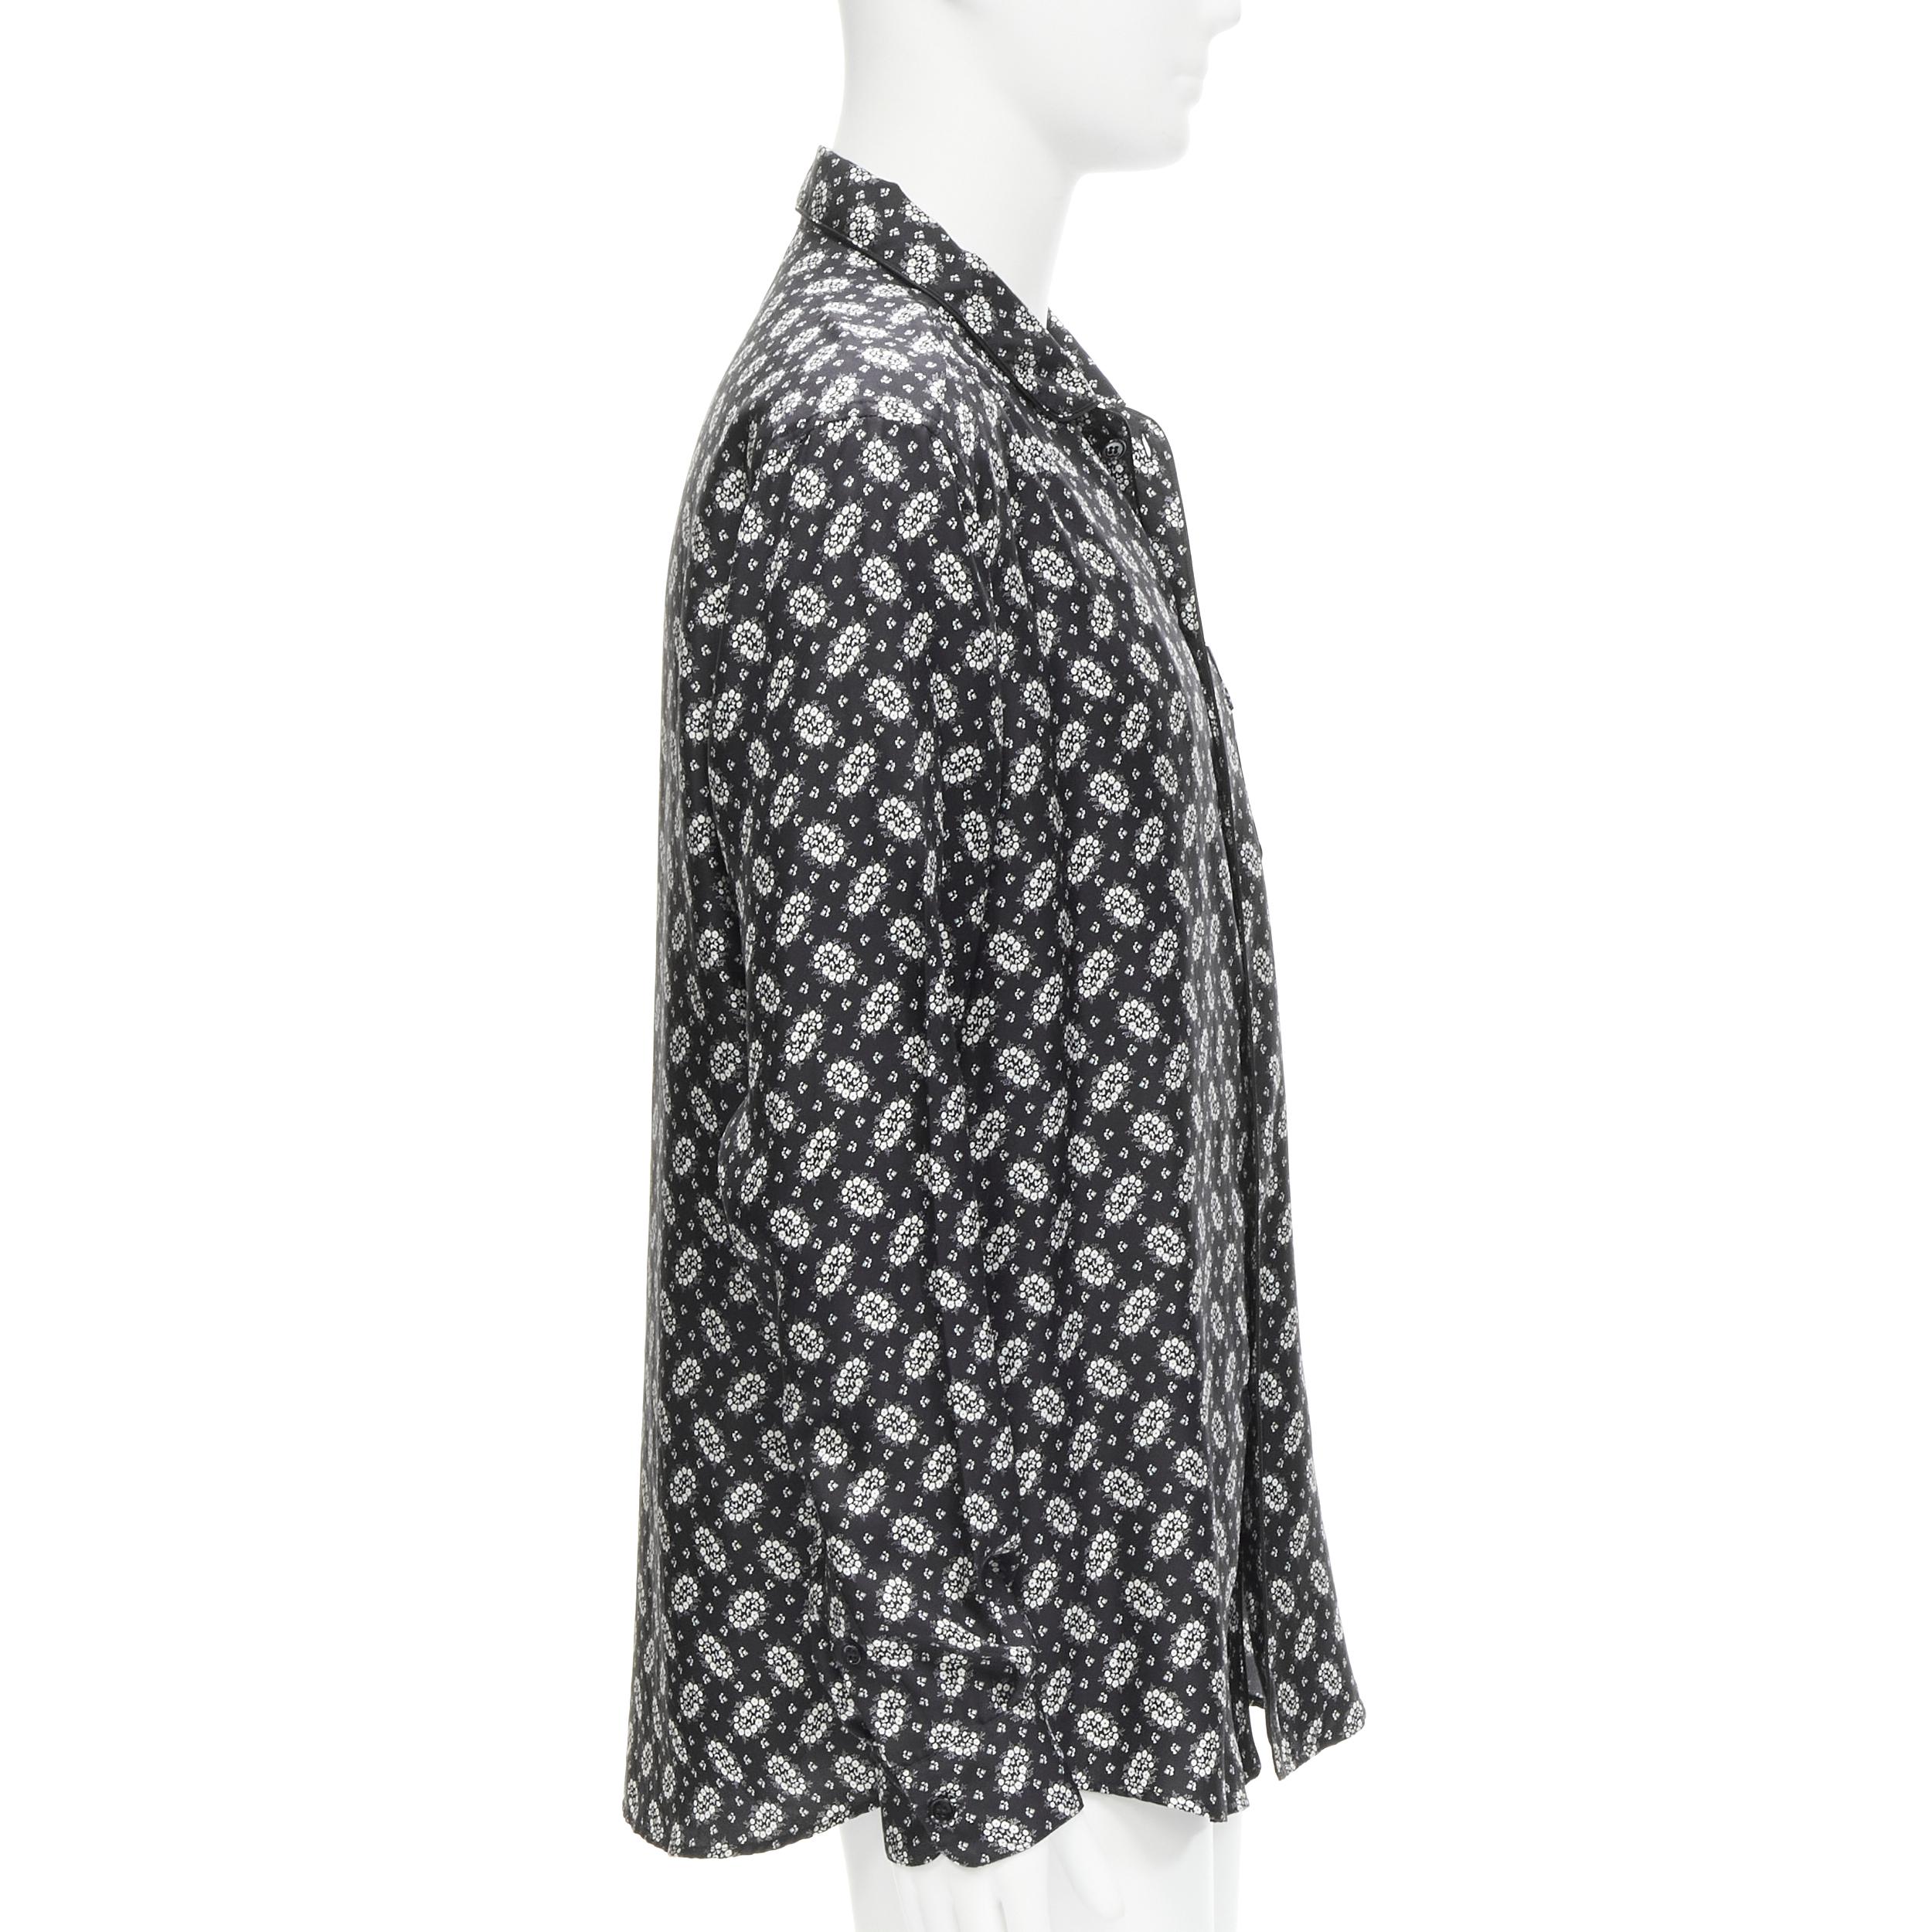 DOLCE GABBANA 100 silk black white floral print pajama shirt IT5 L In Excellent Condition For Sale In Hong Kong, NT